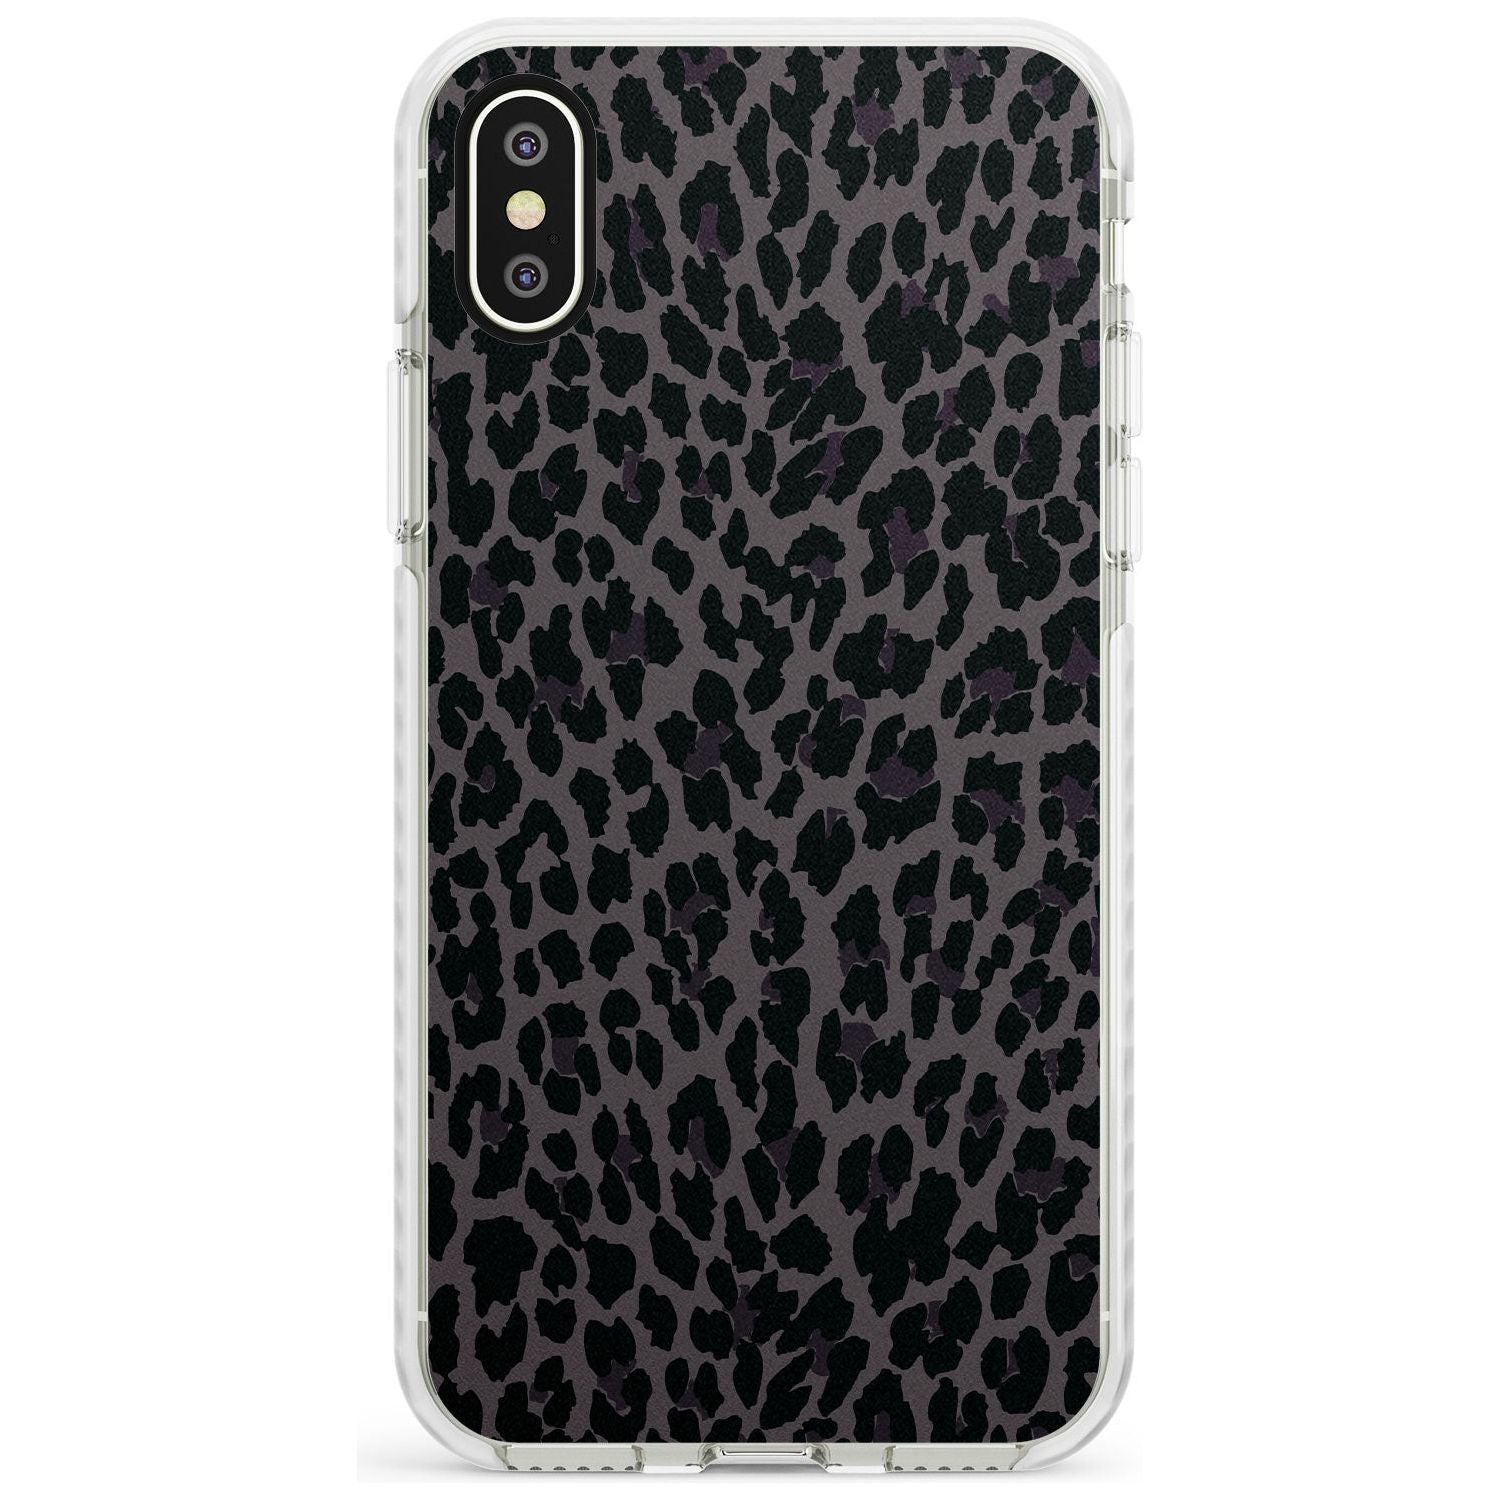 Dark Animal Print Pattern Small Leopard Impact Phone Case for iPhone X XS Max XR